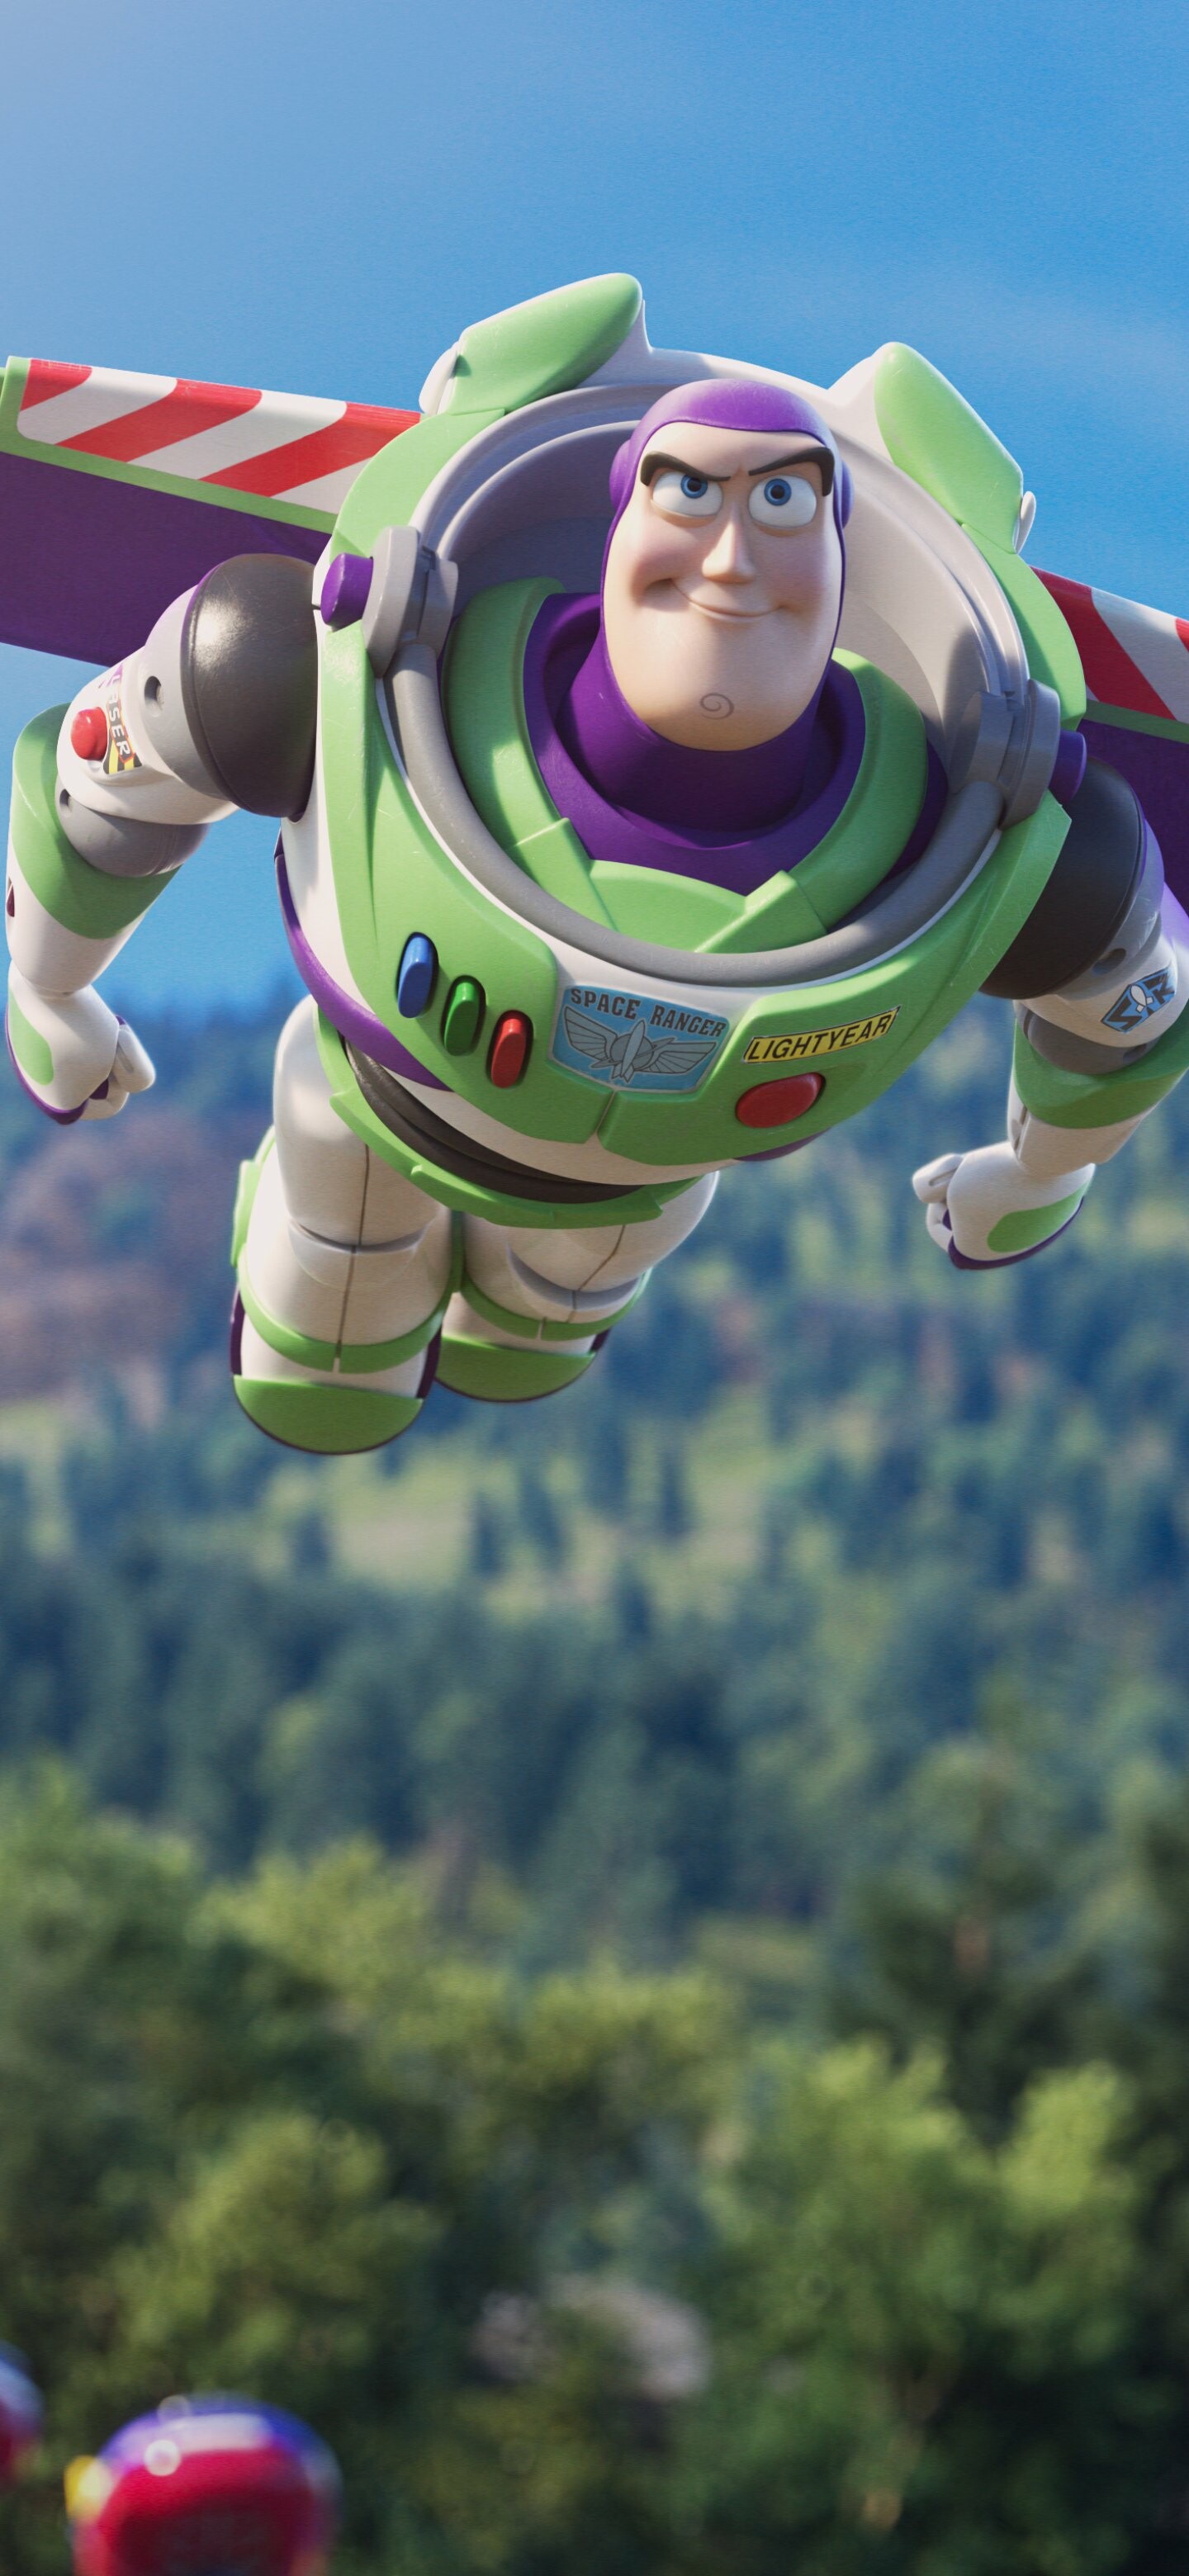 Toy Story 4 movie, Animated adventure, Captivating storyline, Beloved characters, 1440x3120 HD Phone